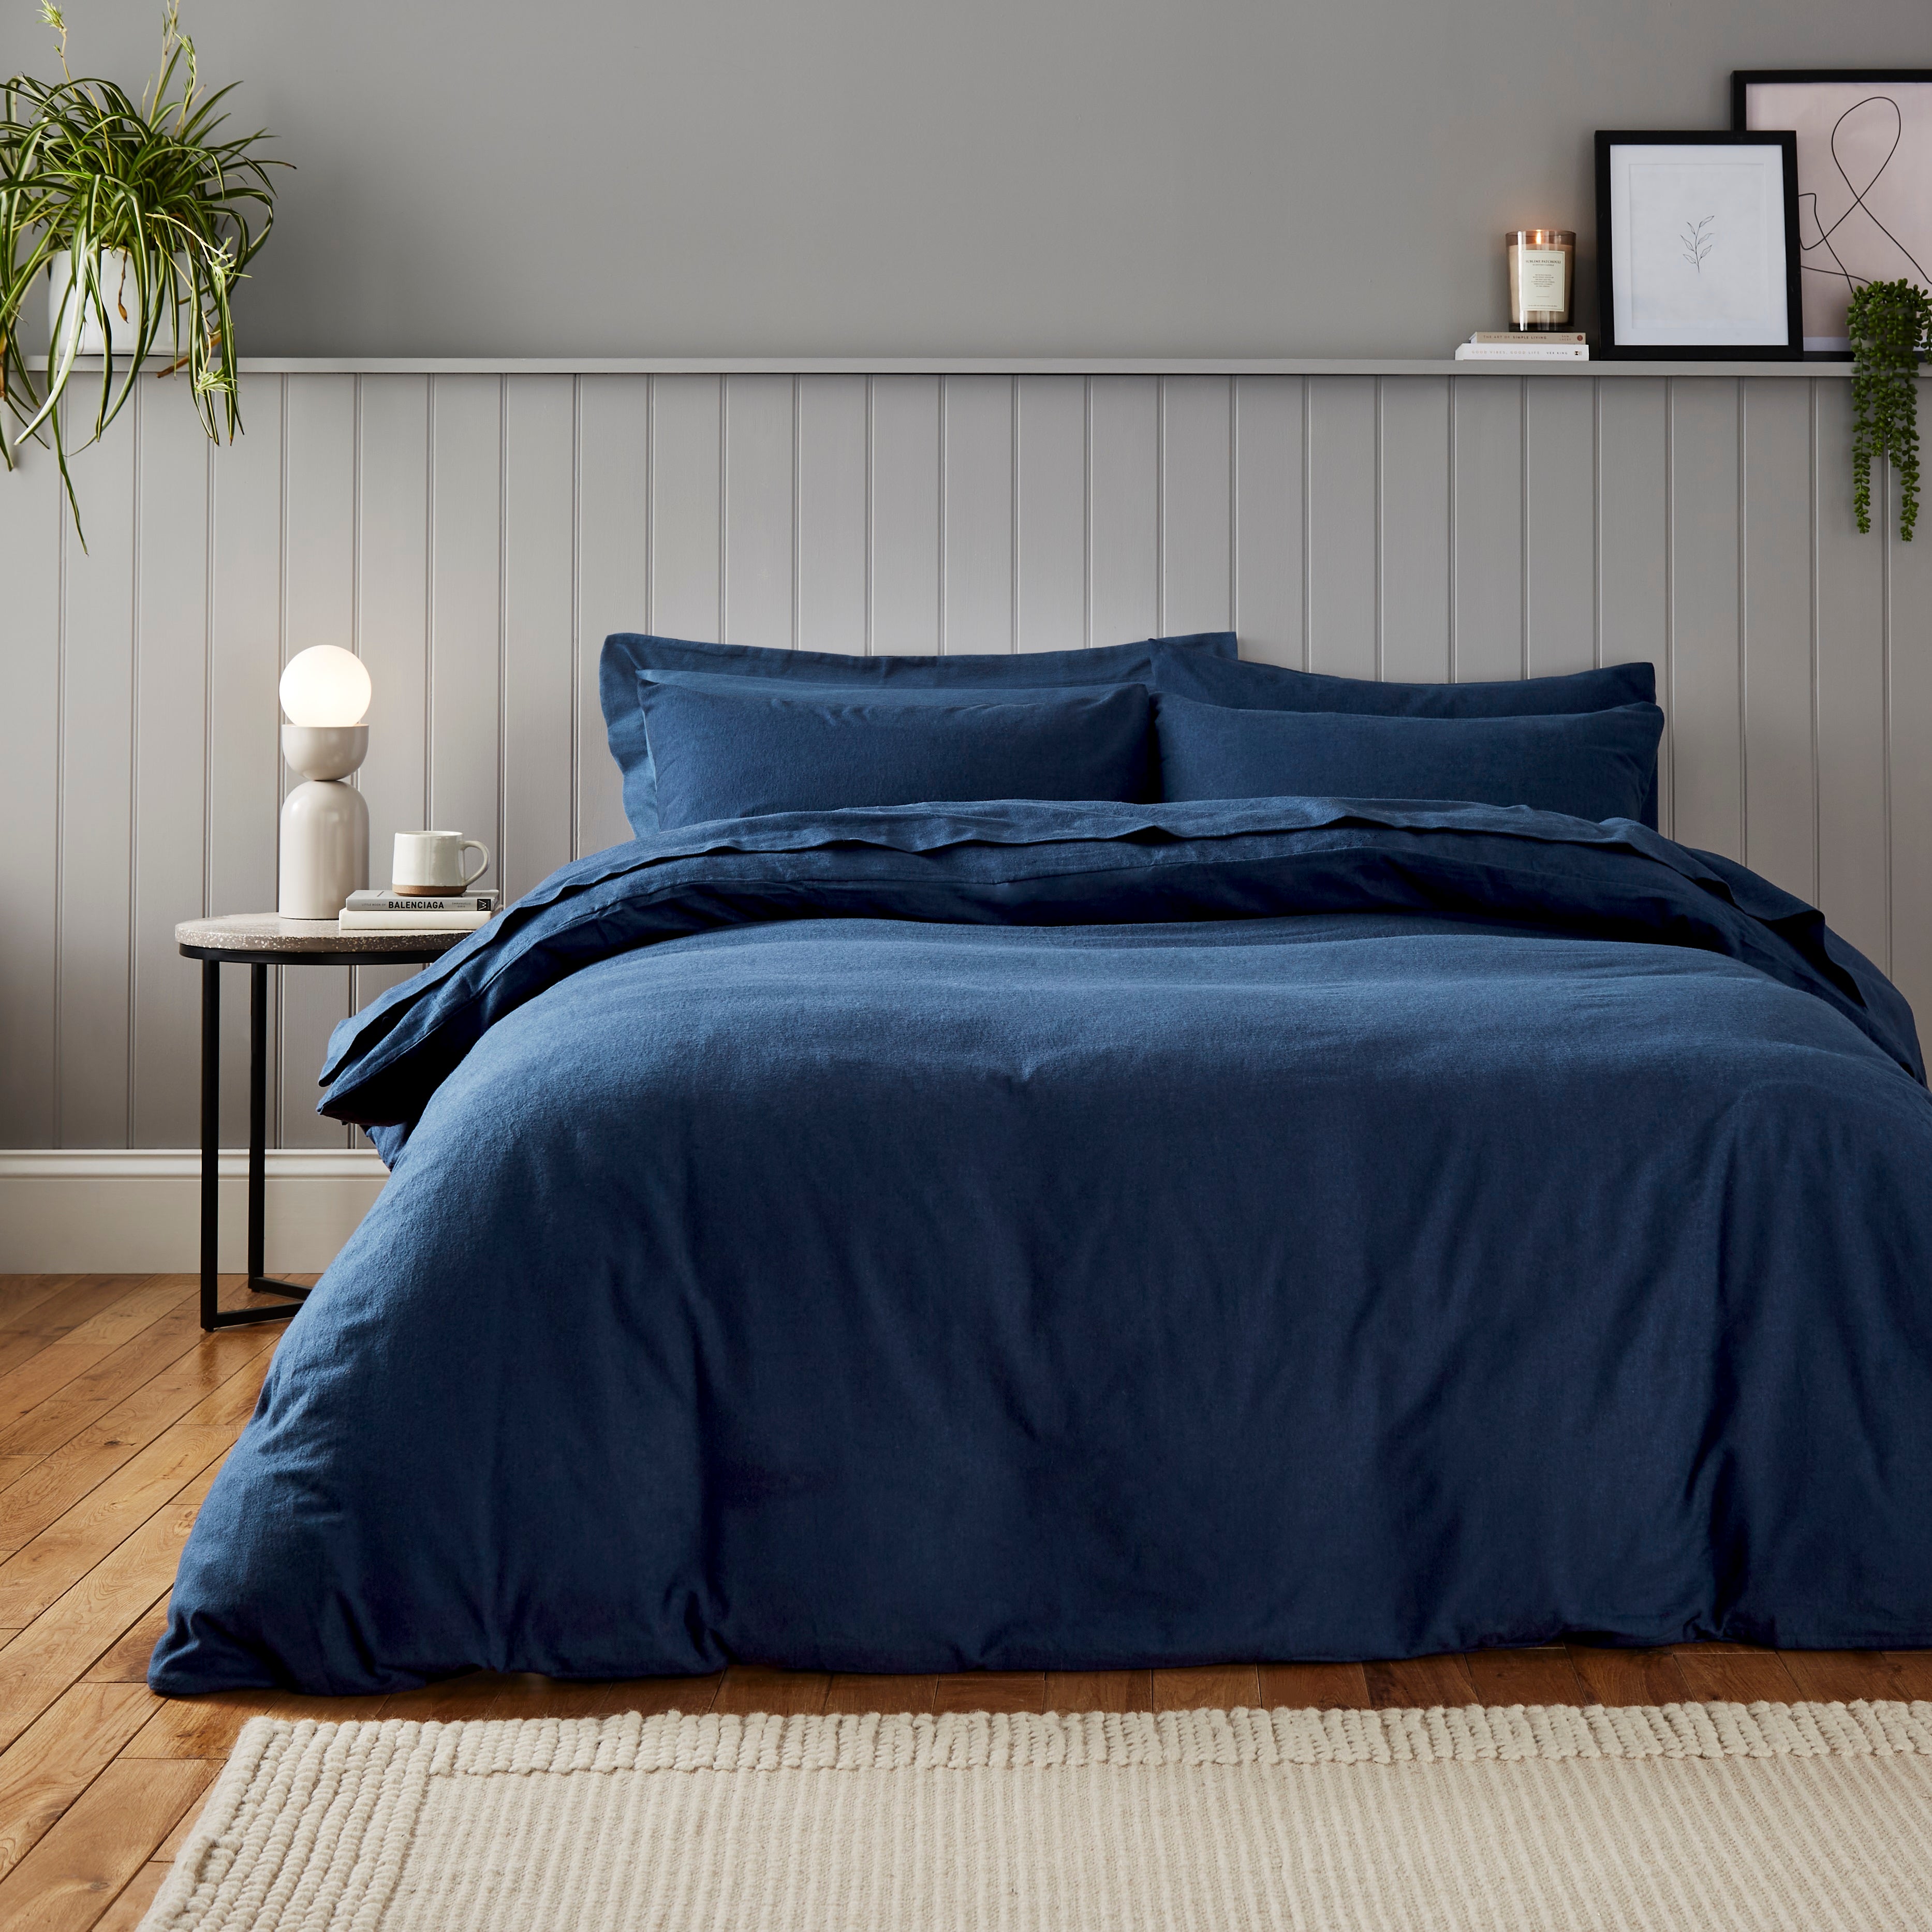 Soft Cosy Luxury Brushed Cotton Navy Duvet Cover And Pillowcase Set Navy